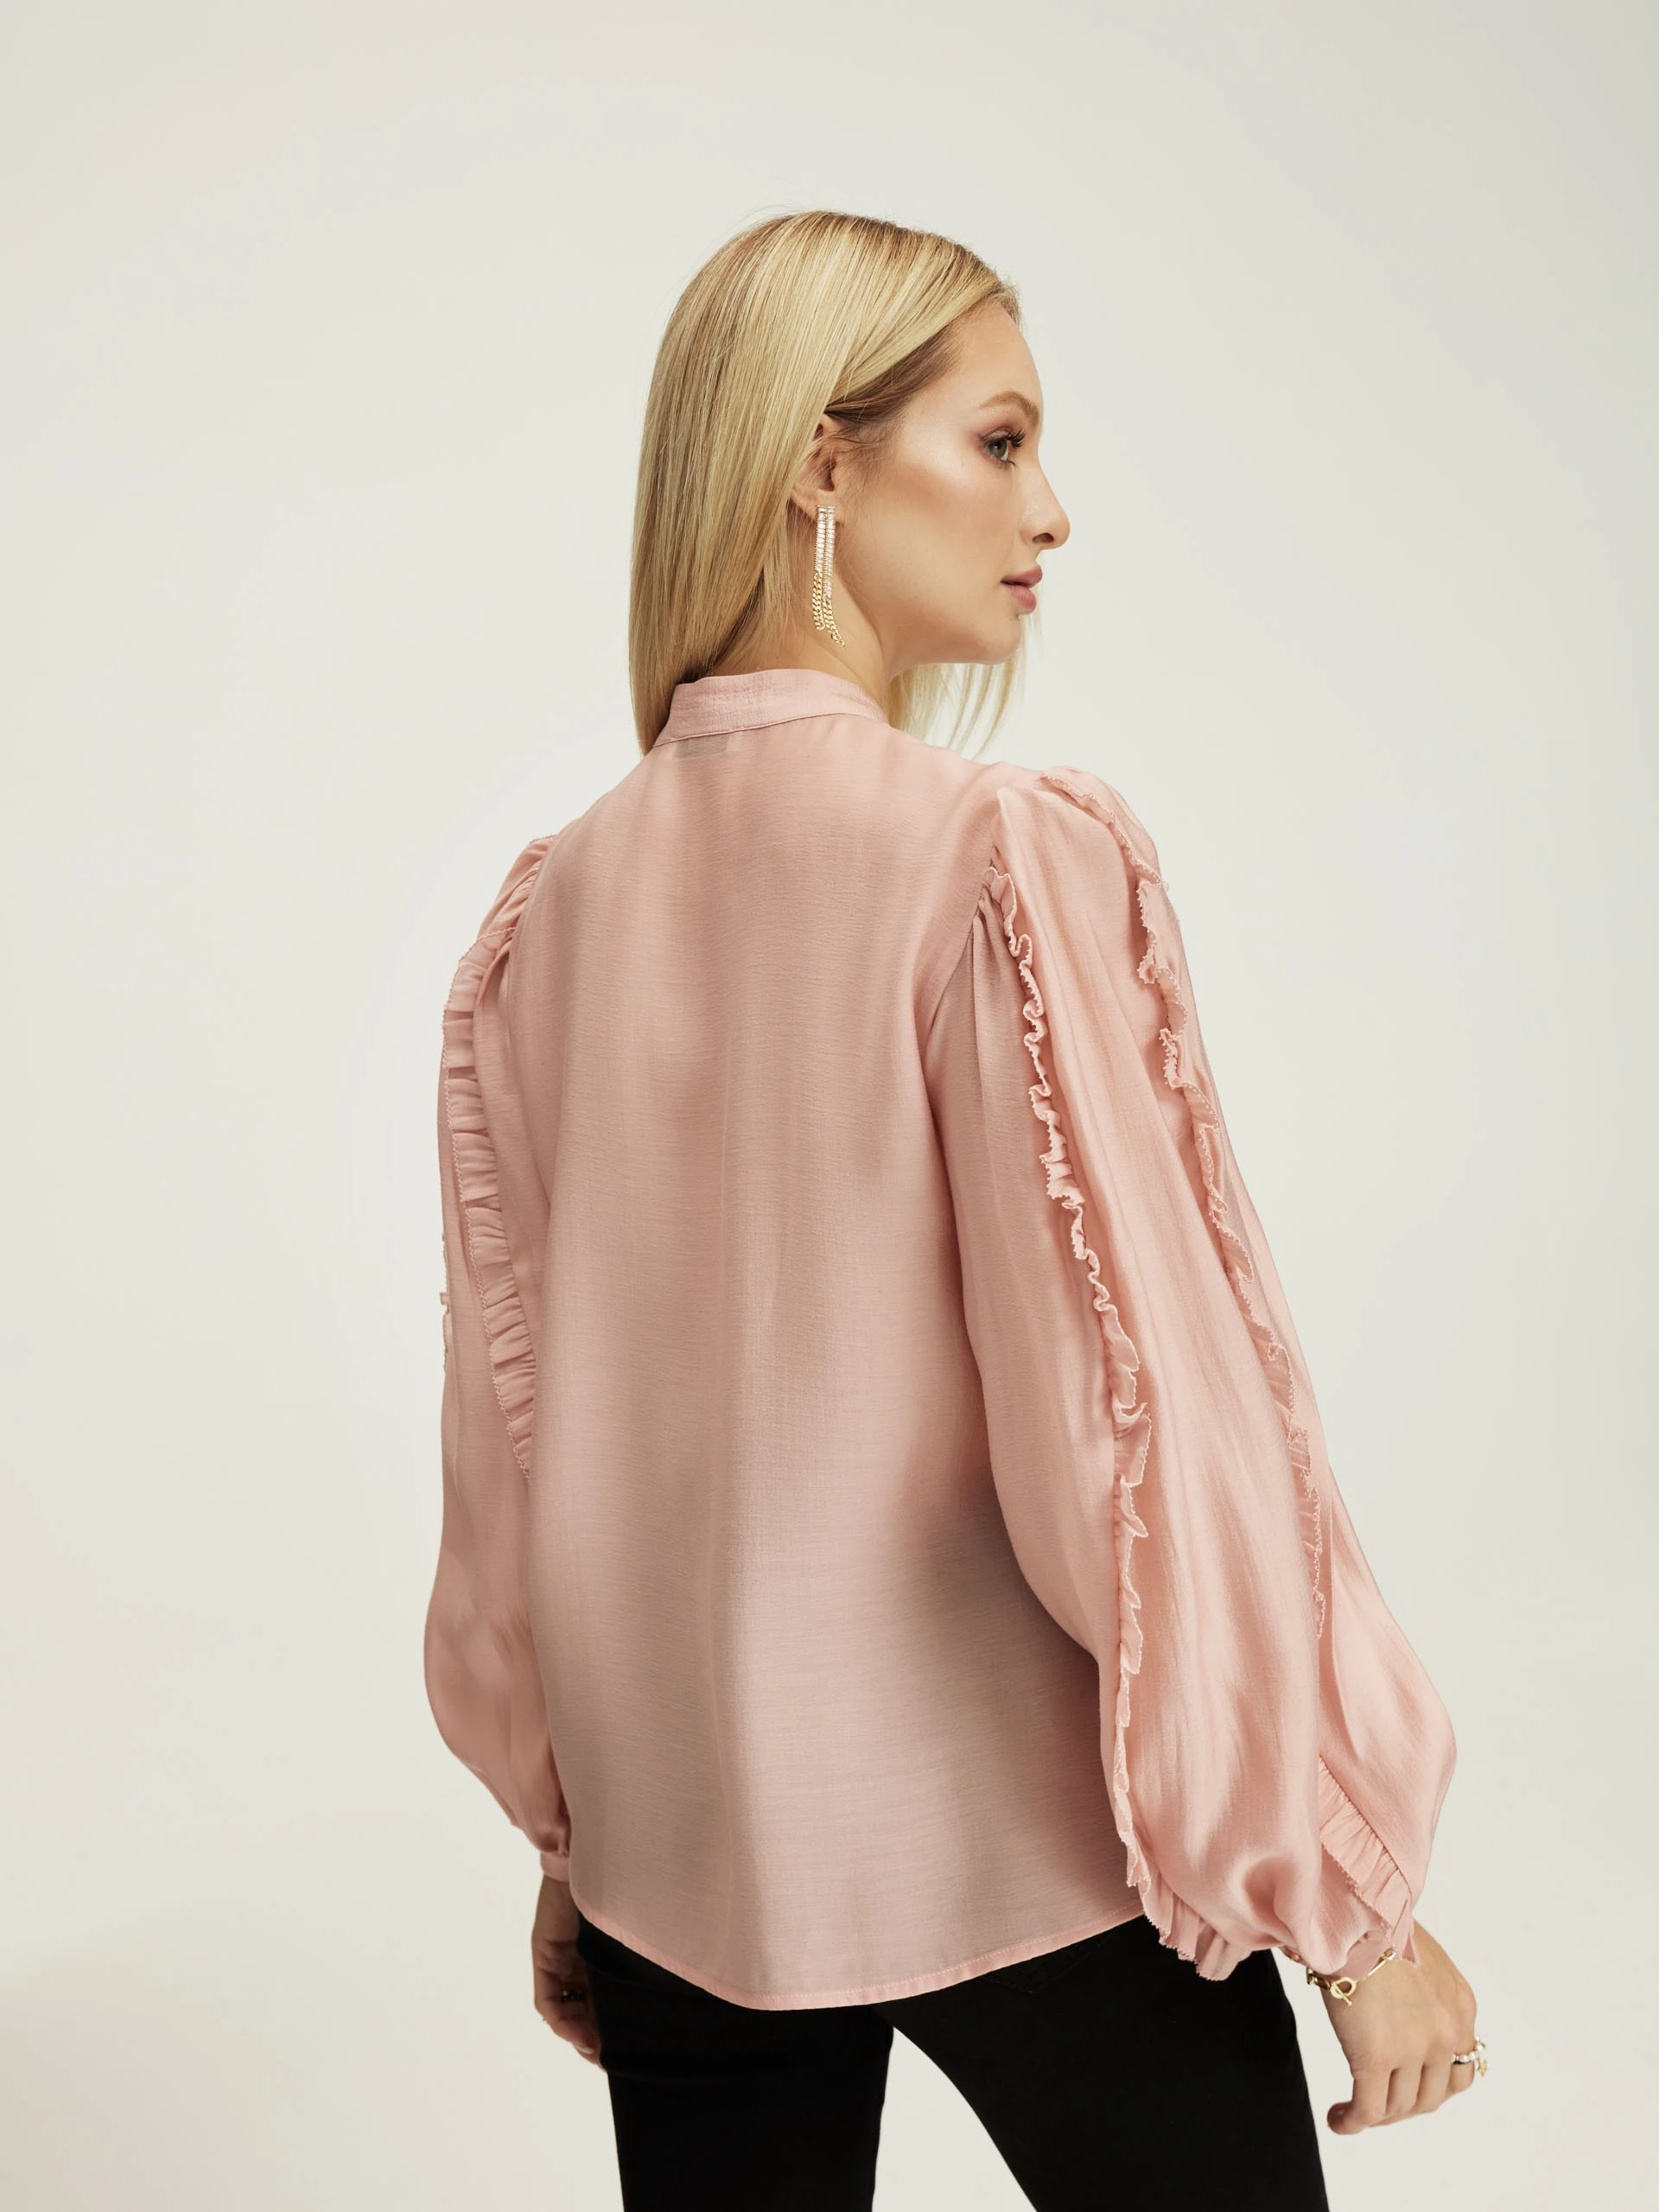 Pink blouse with ruffles on the sleeves